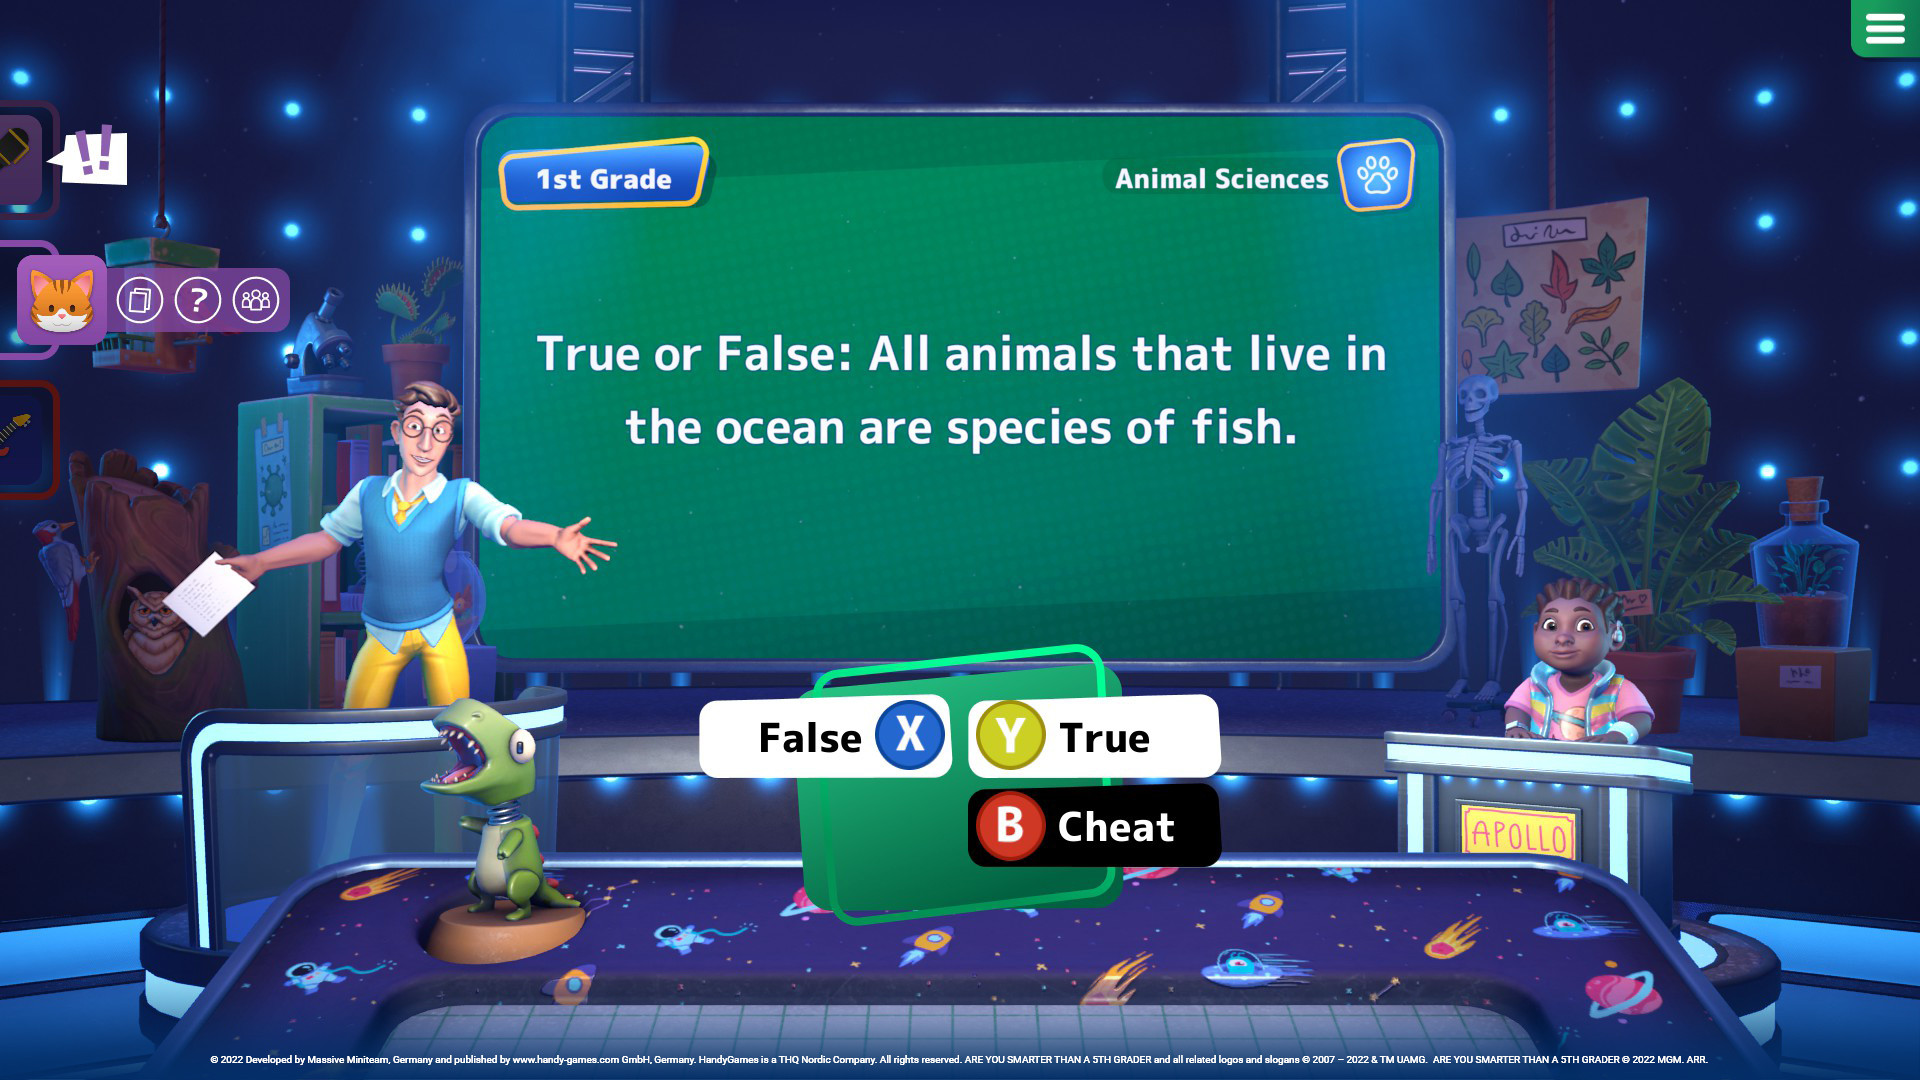 Are You Smarter Than A 5th Grader? screenshot 44770